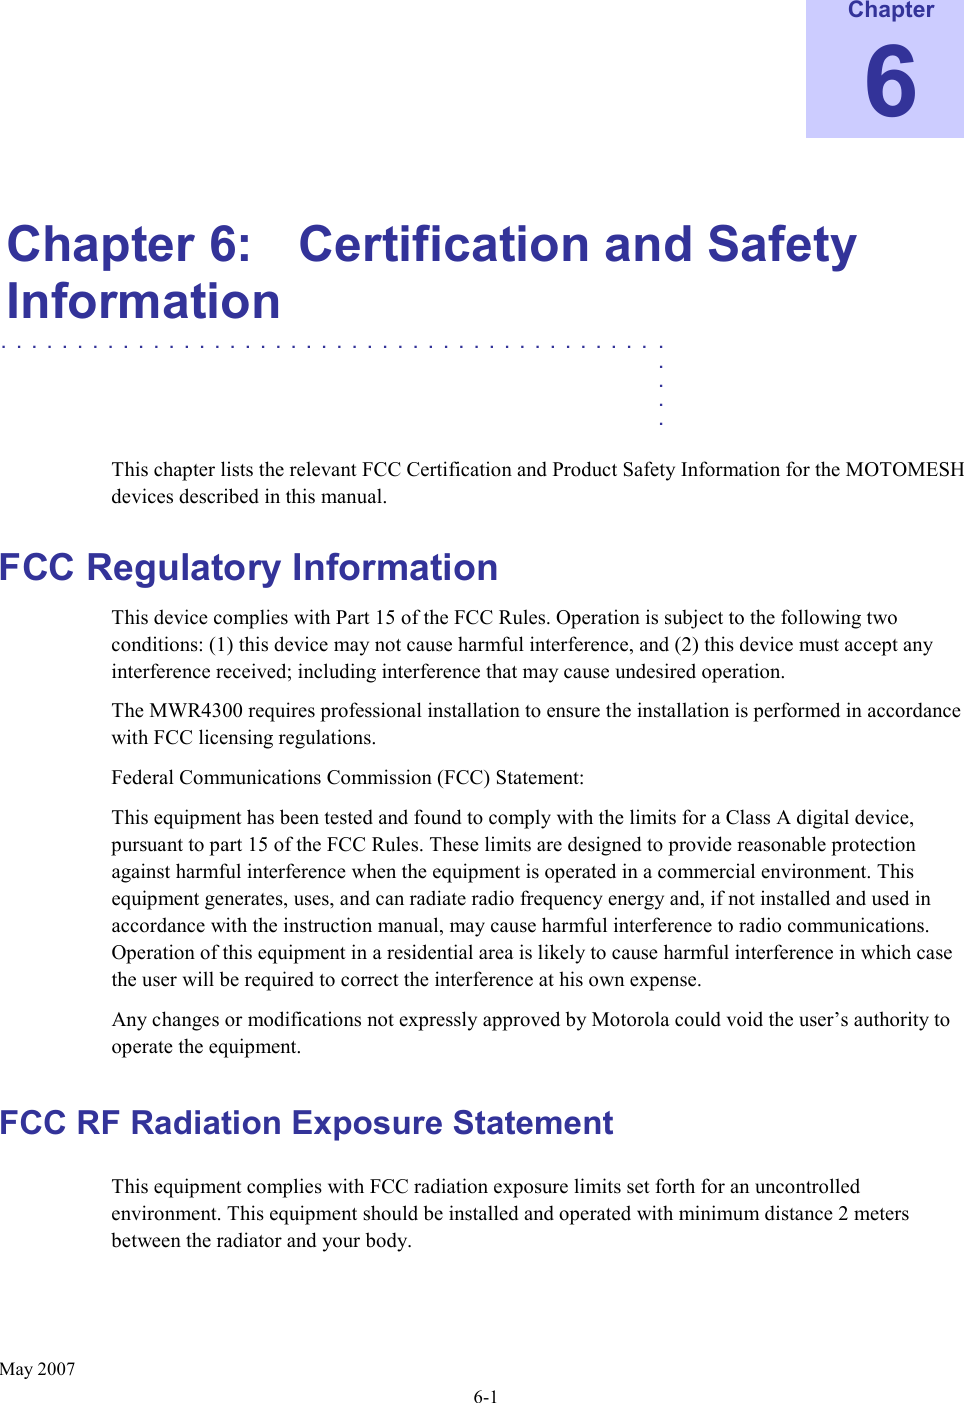      May 2007 6-1 Chapter 6  Chapter 6:  Certification and Safety Information ............................................   .    .    .    .  This chapter lists the relevant FCC Certification and Product Safety Information for the MOTOMESH devices described in this manual. FCC Regulatory Information This device complies with Part 15 of the FCC Rules. Operation is subject to the following two conditions: (1) this device may not cause harmful interference, and (2) this device must accept any interference received; including interference that may cause undesired operation. The MWR4300 requires professional installation to ensure the installation is performed in accordance with FCC licensing regulations.   Federal Communications Commission (FCC) Statement: This equipment has been tested and found to comply with the limits for a Class A digital device, pursuant to part 15 of the FCC Rules. These limits are designed to provide reasonable protection against harmful interference when the equipment is operated in a commercial environment. This equipment generates, uses, and can radiate radio frequency energy and, if not installed and used in accordance with the instruction manual, may cause harmful interference to radio communications. Operation of this equipment in a residential area is likely to cause harmful interference in which case the user will be required to correct the interference at his own expense.  Any changes or modifications not expressly approved by Motorola could void the user’s authority to operate the equipment. FCC RF Radiation Exposure Statement This equipment complies with FCC radiation exposure limits set forth for an uncontrolled environment. This equipment should be installed and operated with minimum distance 2 meters      between the radiator and your body.  